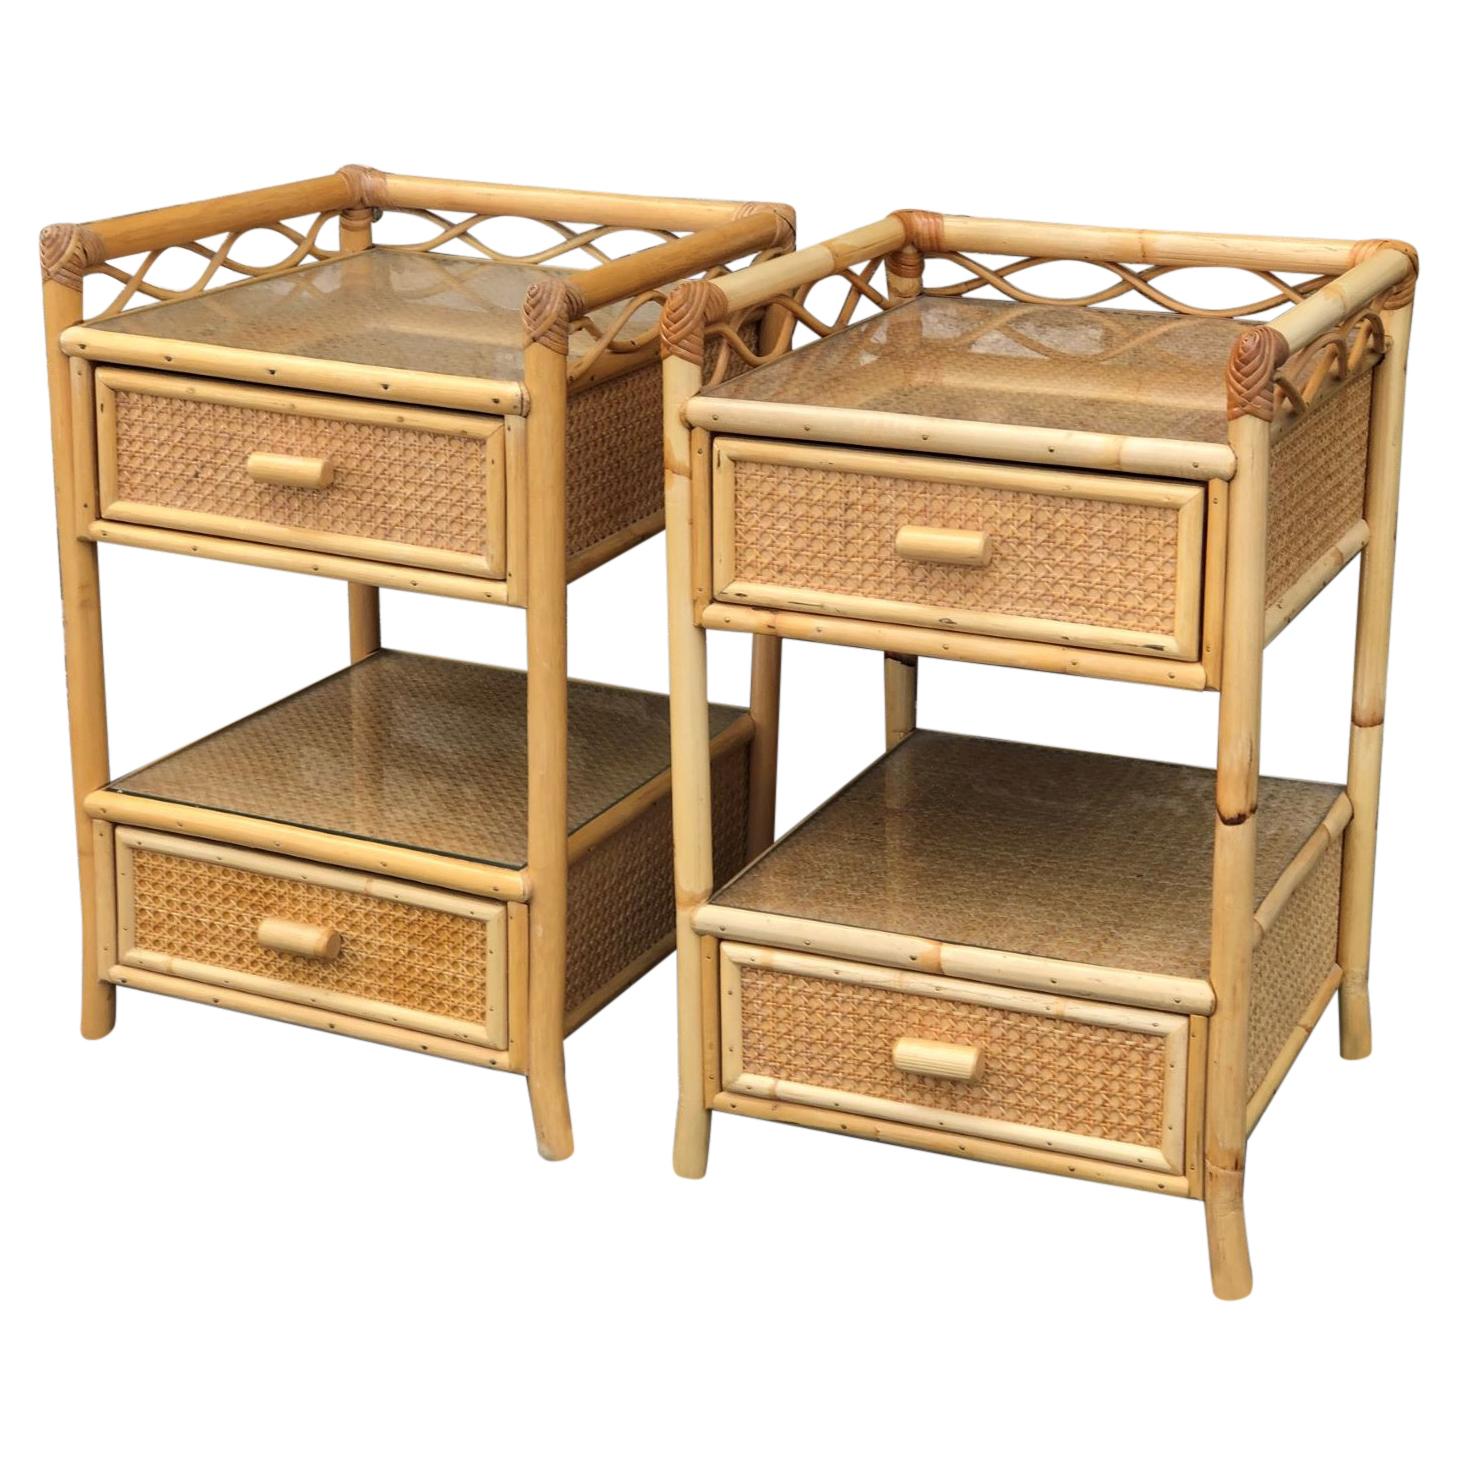 Pair of Mid Century Rattan / Cane Nightstands / Bedside Tables, English, 1970s